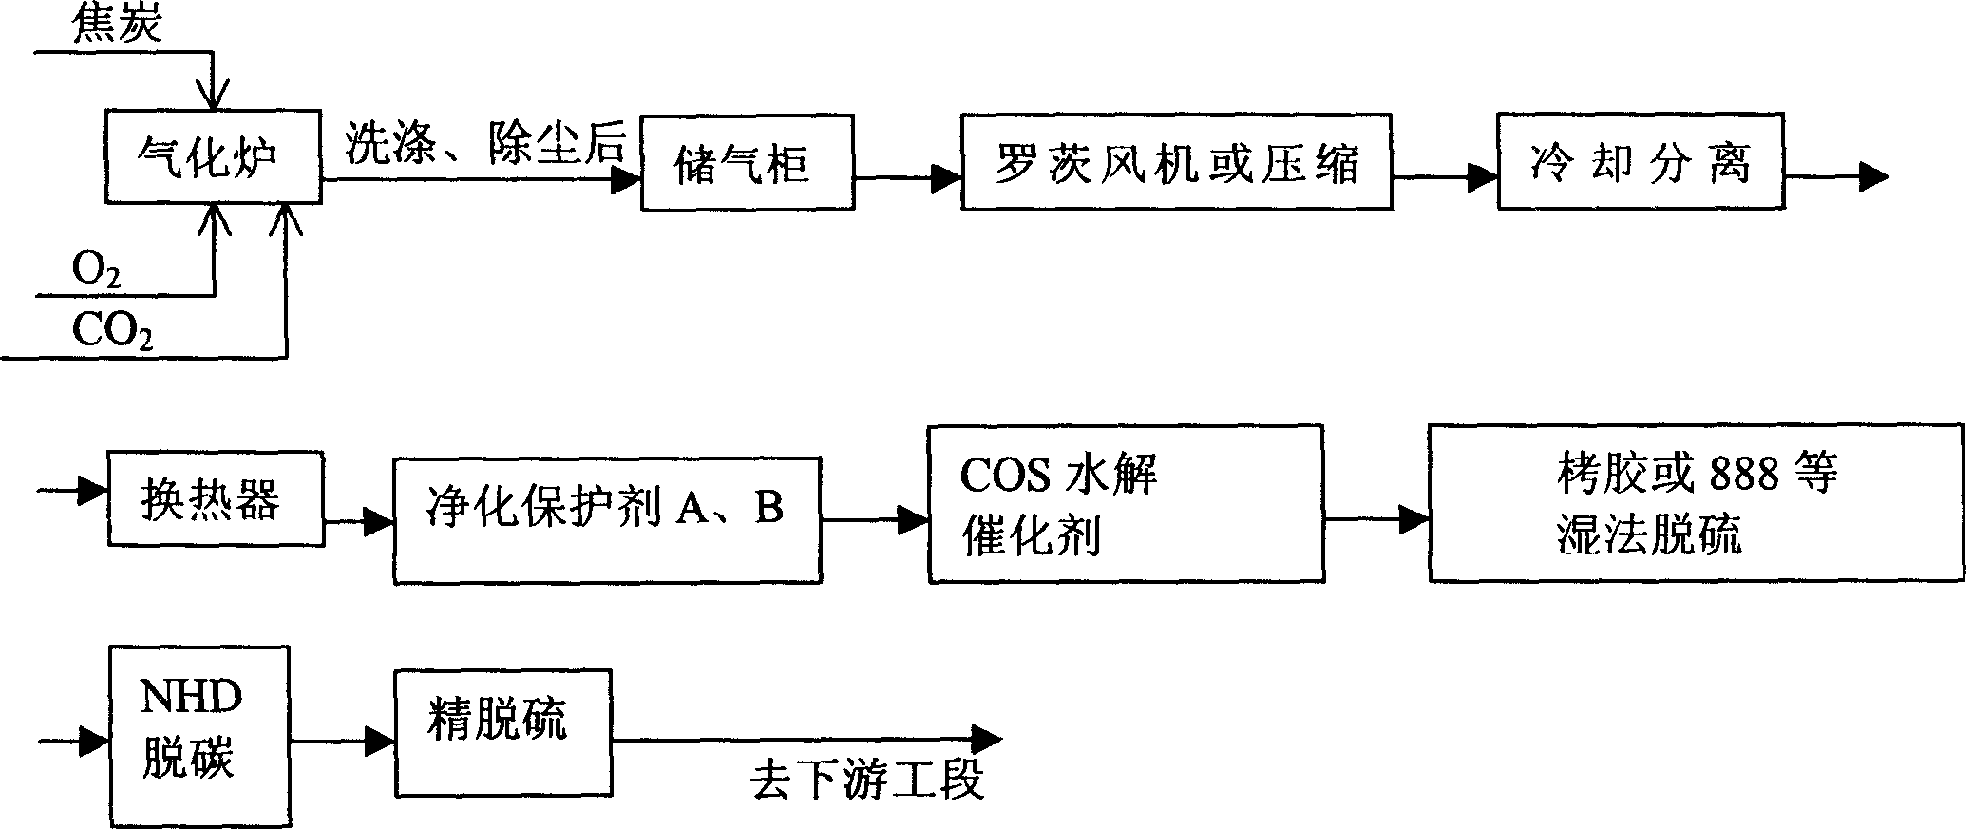 Process for preparing high purity carbon monoxide gas by desulfurization of organic sulfur at low and normal temperature